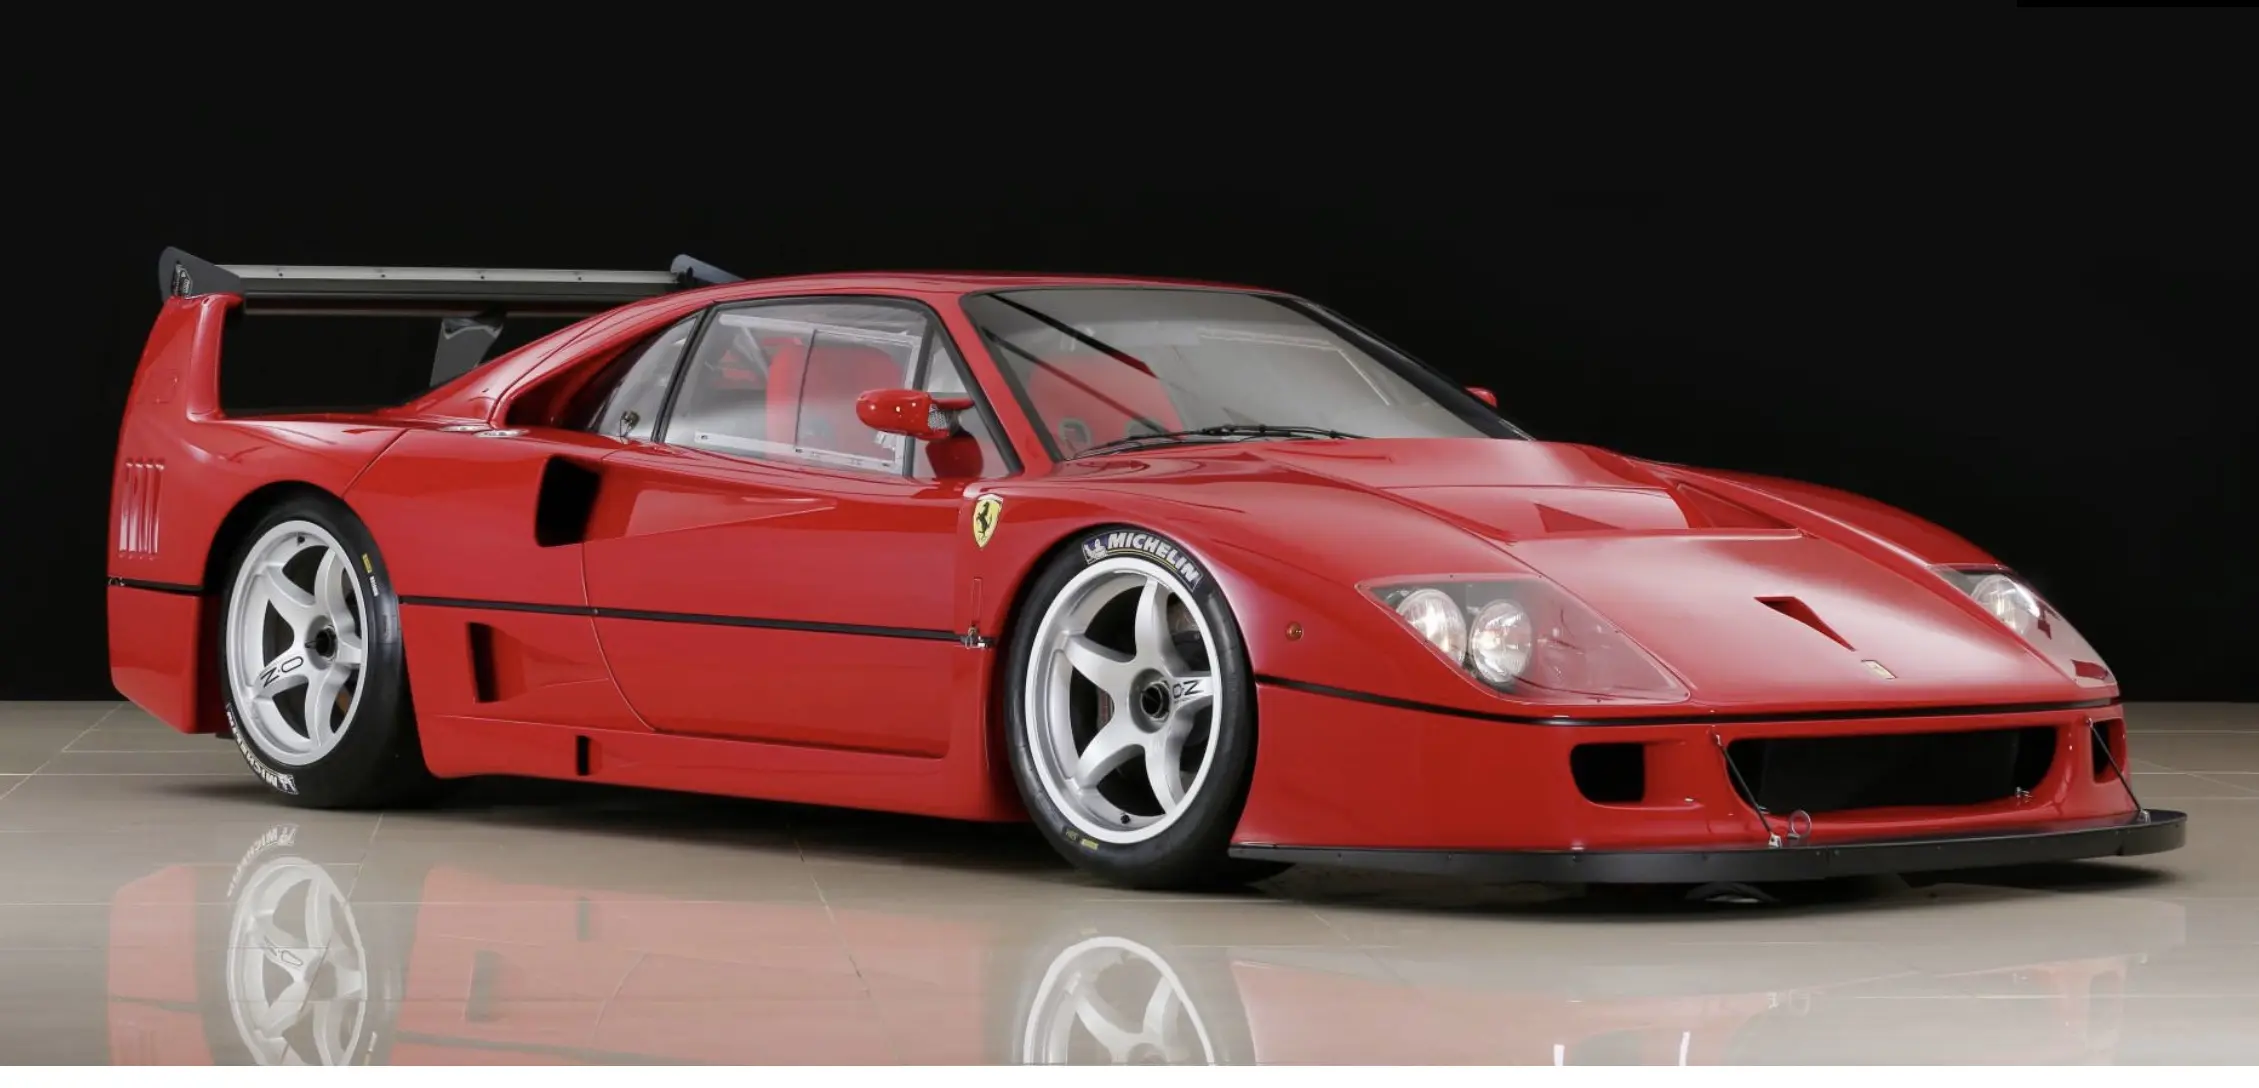 ferrari f40 lm for sale - What is the difference between Ferrari F40 and F40 LM